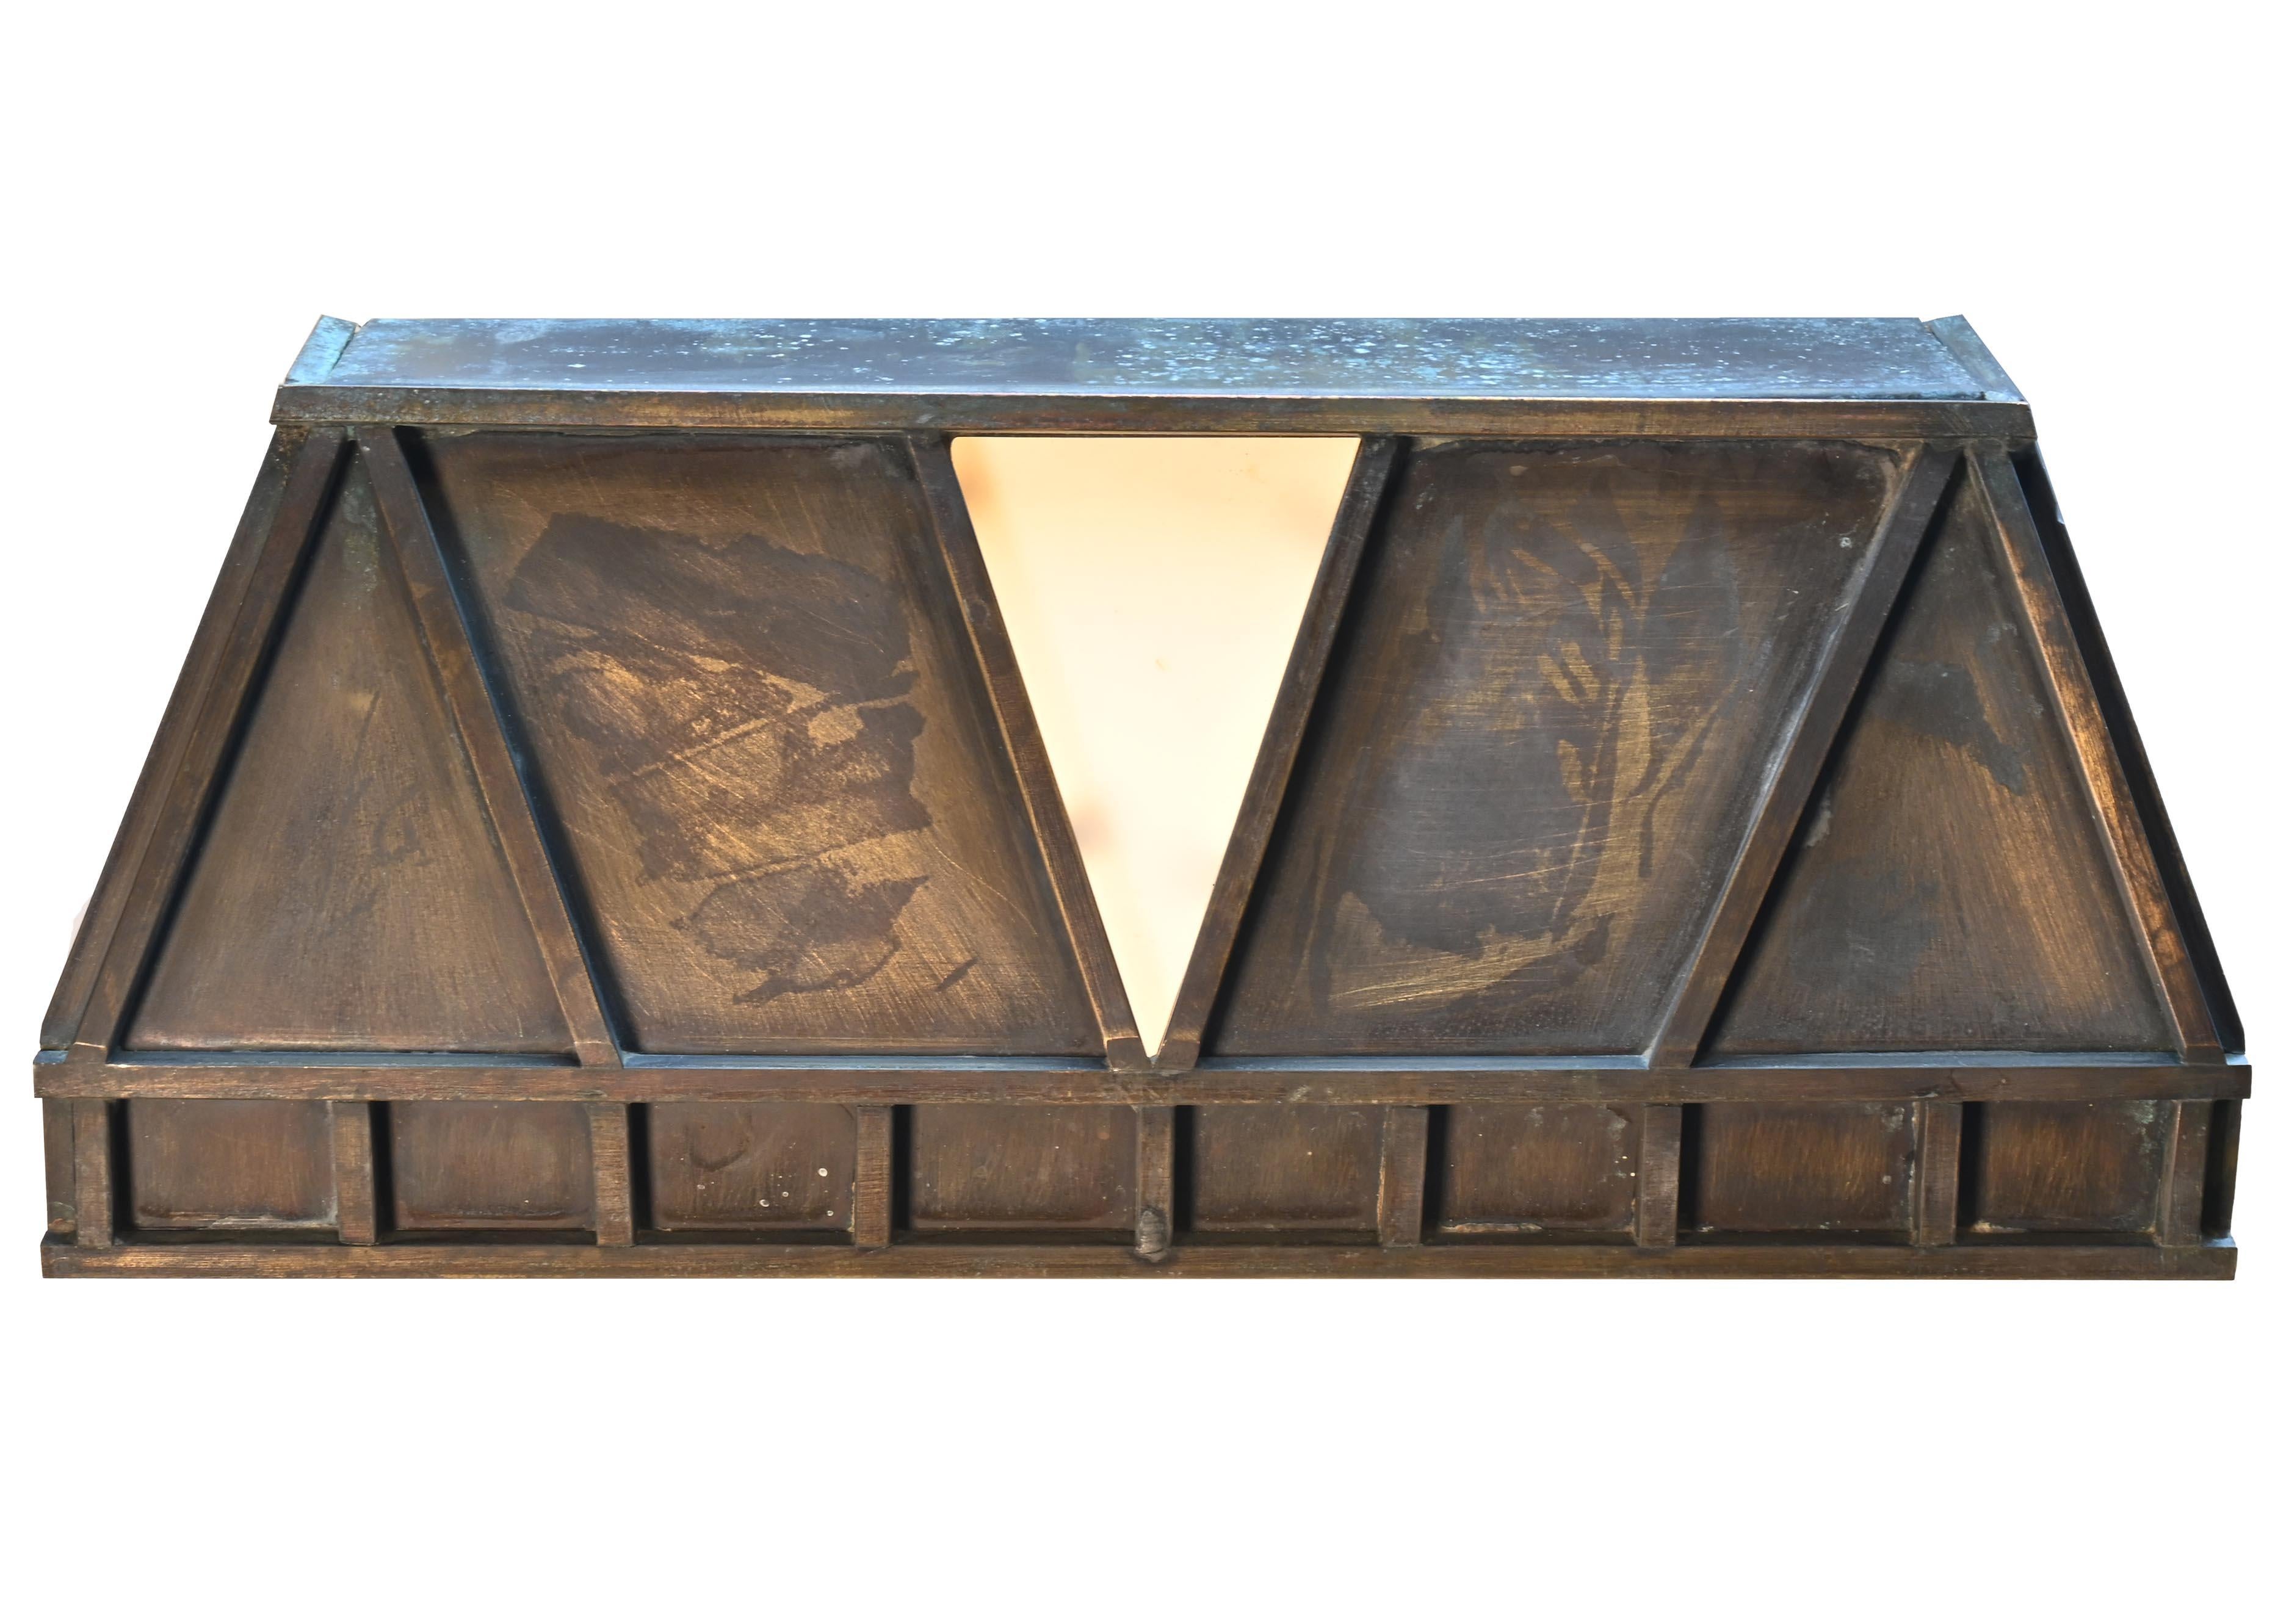 Condition: Age consistent, clean & illuminating,
circa 1940s
Material: Brass or bronze, sheet copper, stained glass
Finish: Original with patina
Country of origin: USA
Illumination: Two Edison socket 

Fixture dimensions (as shown): 14 1/2”